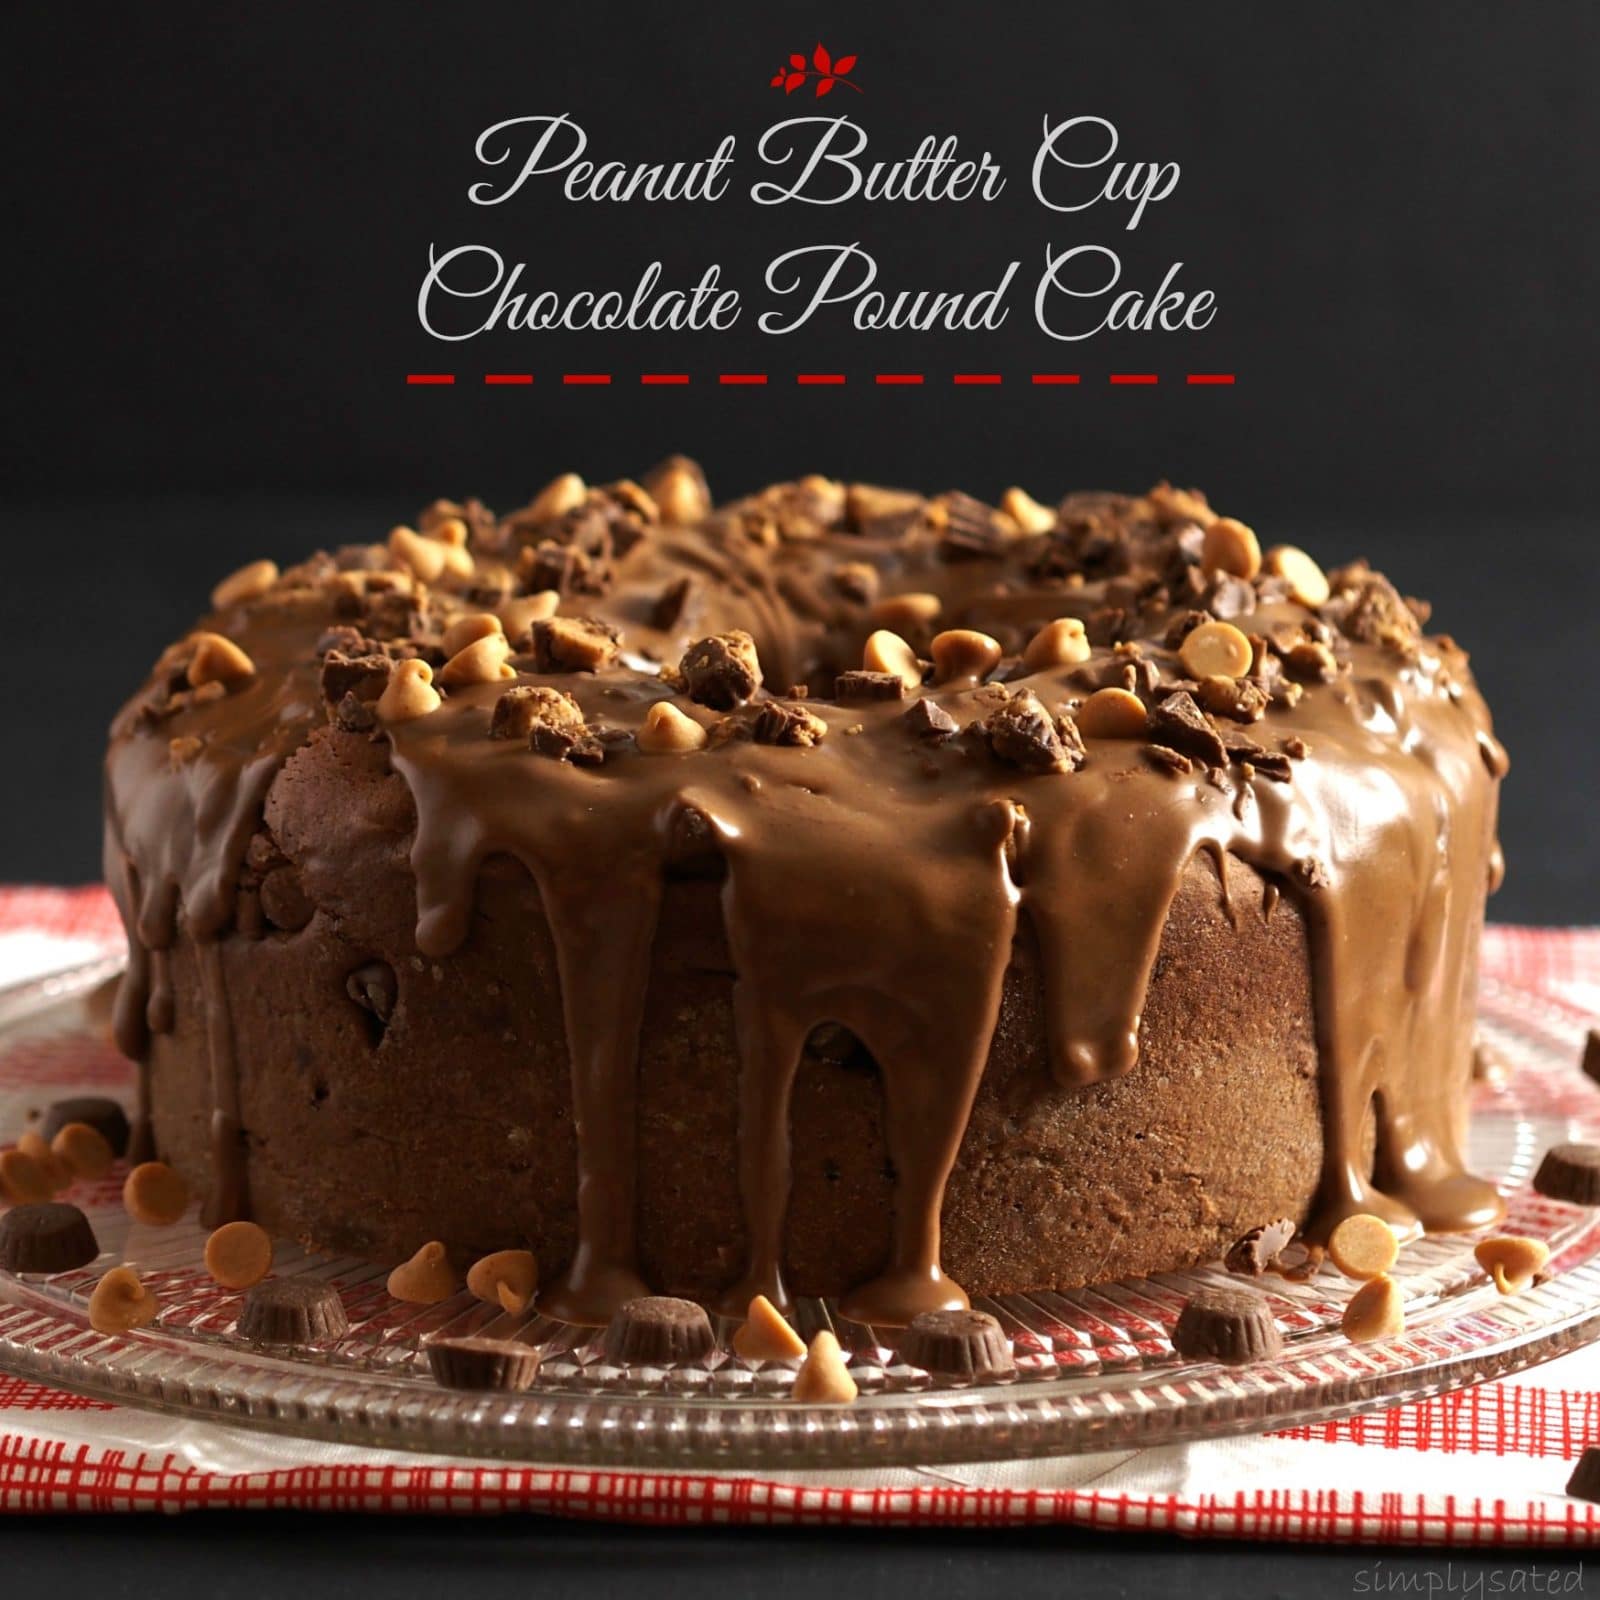 Peanut Butter Cup Chocolate Pound Cake-chocolate pound cake with chopped peanut butter cups & topped with peanut butter cup frosting. Simply Sated